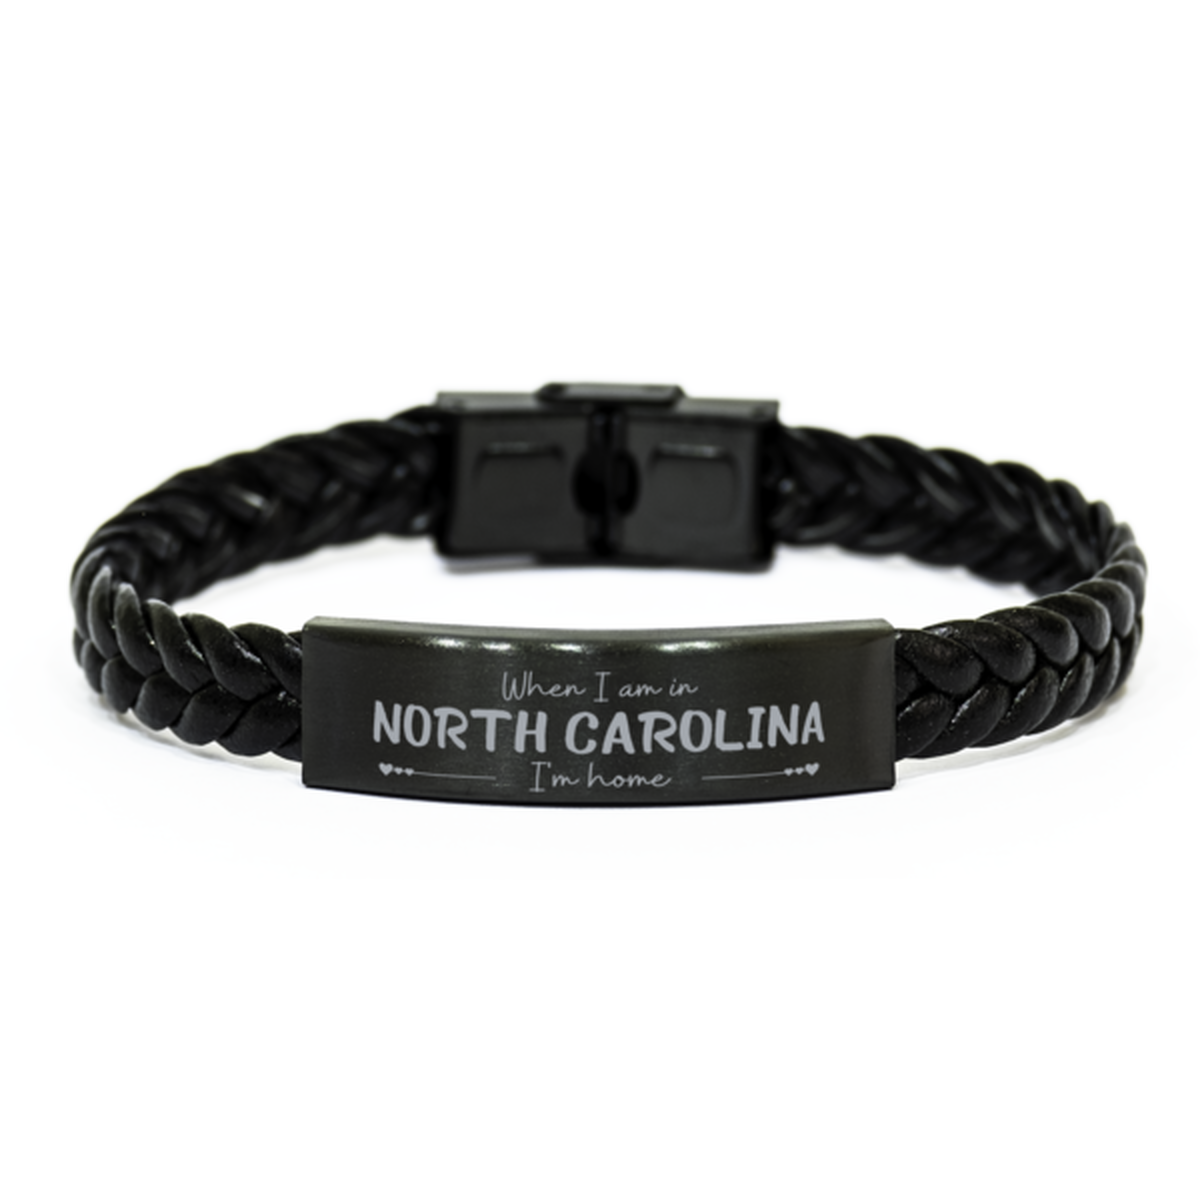 When I am in North Carolina I'm home Braided Leather Bracelet, Cheap Gifts For North Carolina, State North Carolina Birthday Gifts for Friends Coworker